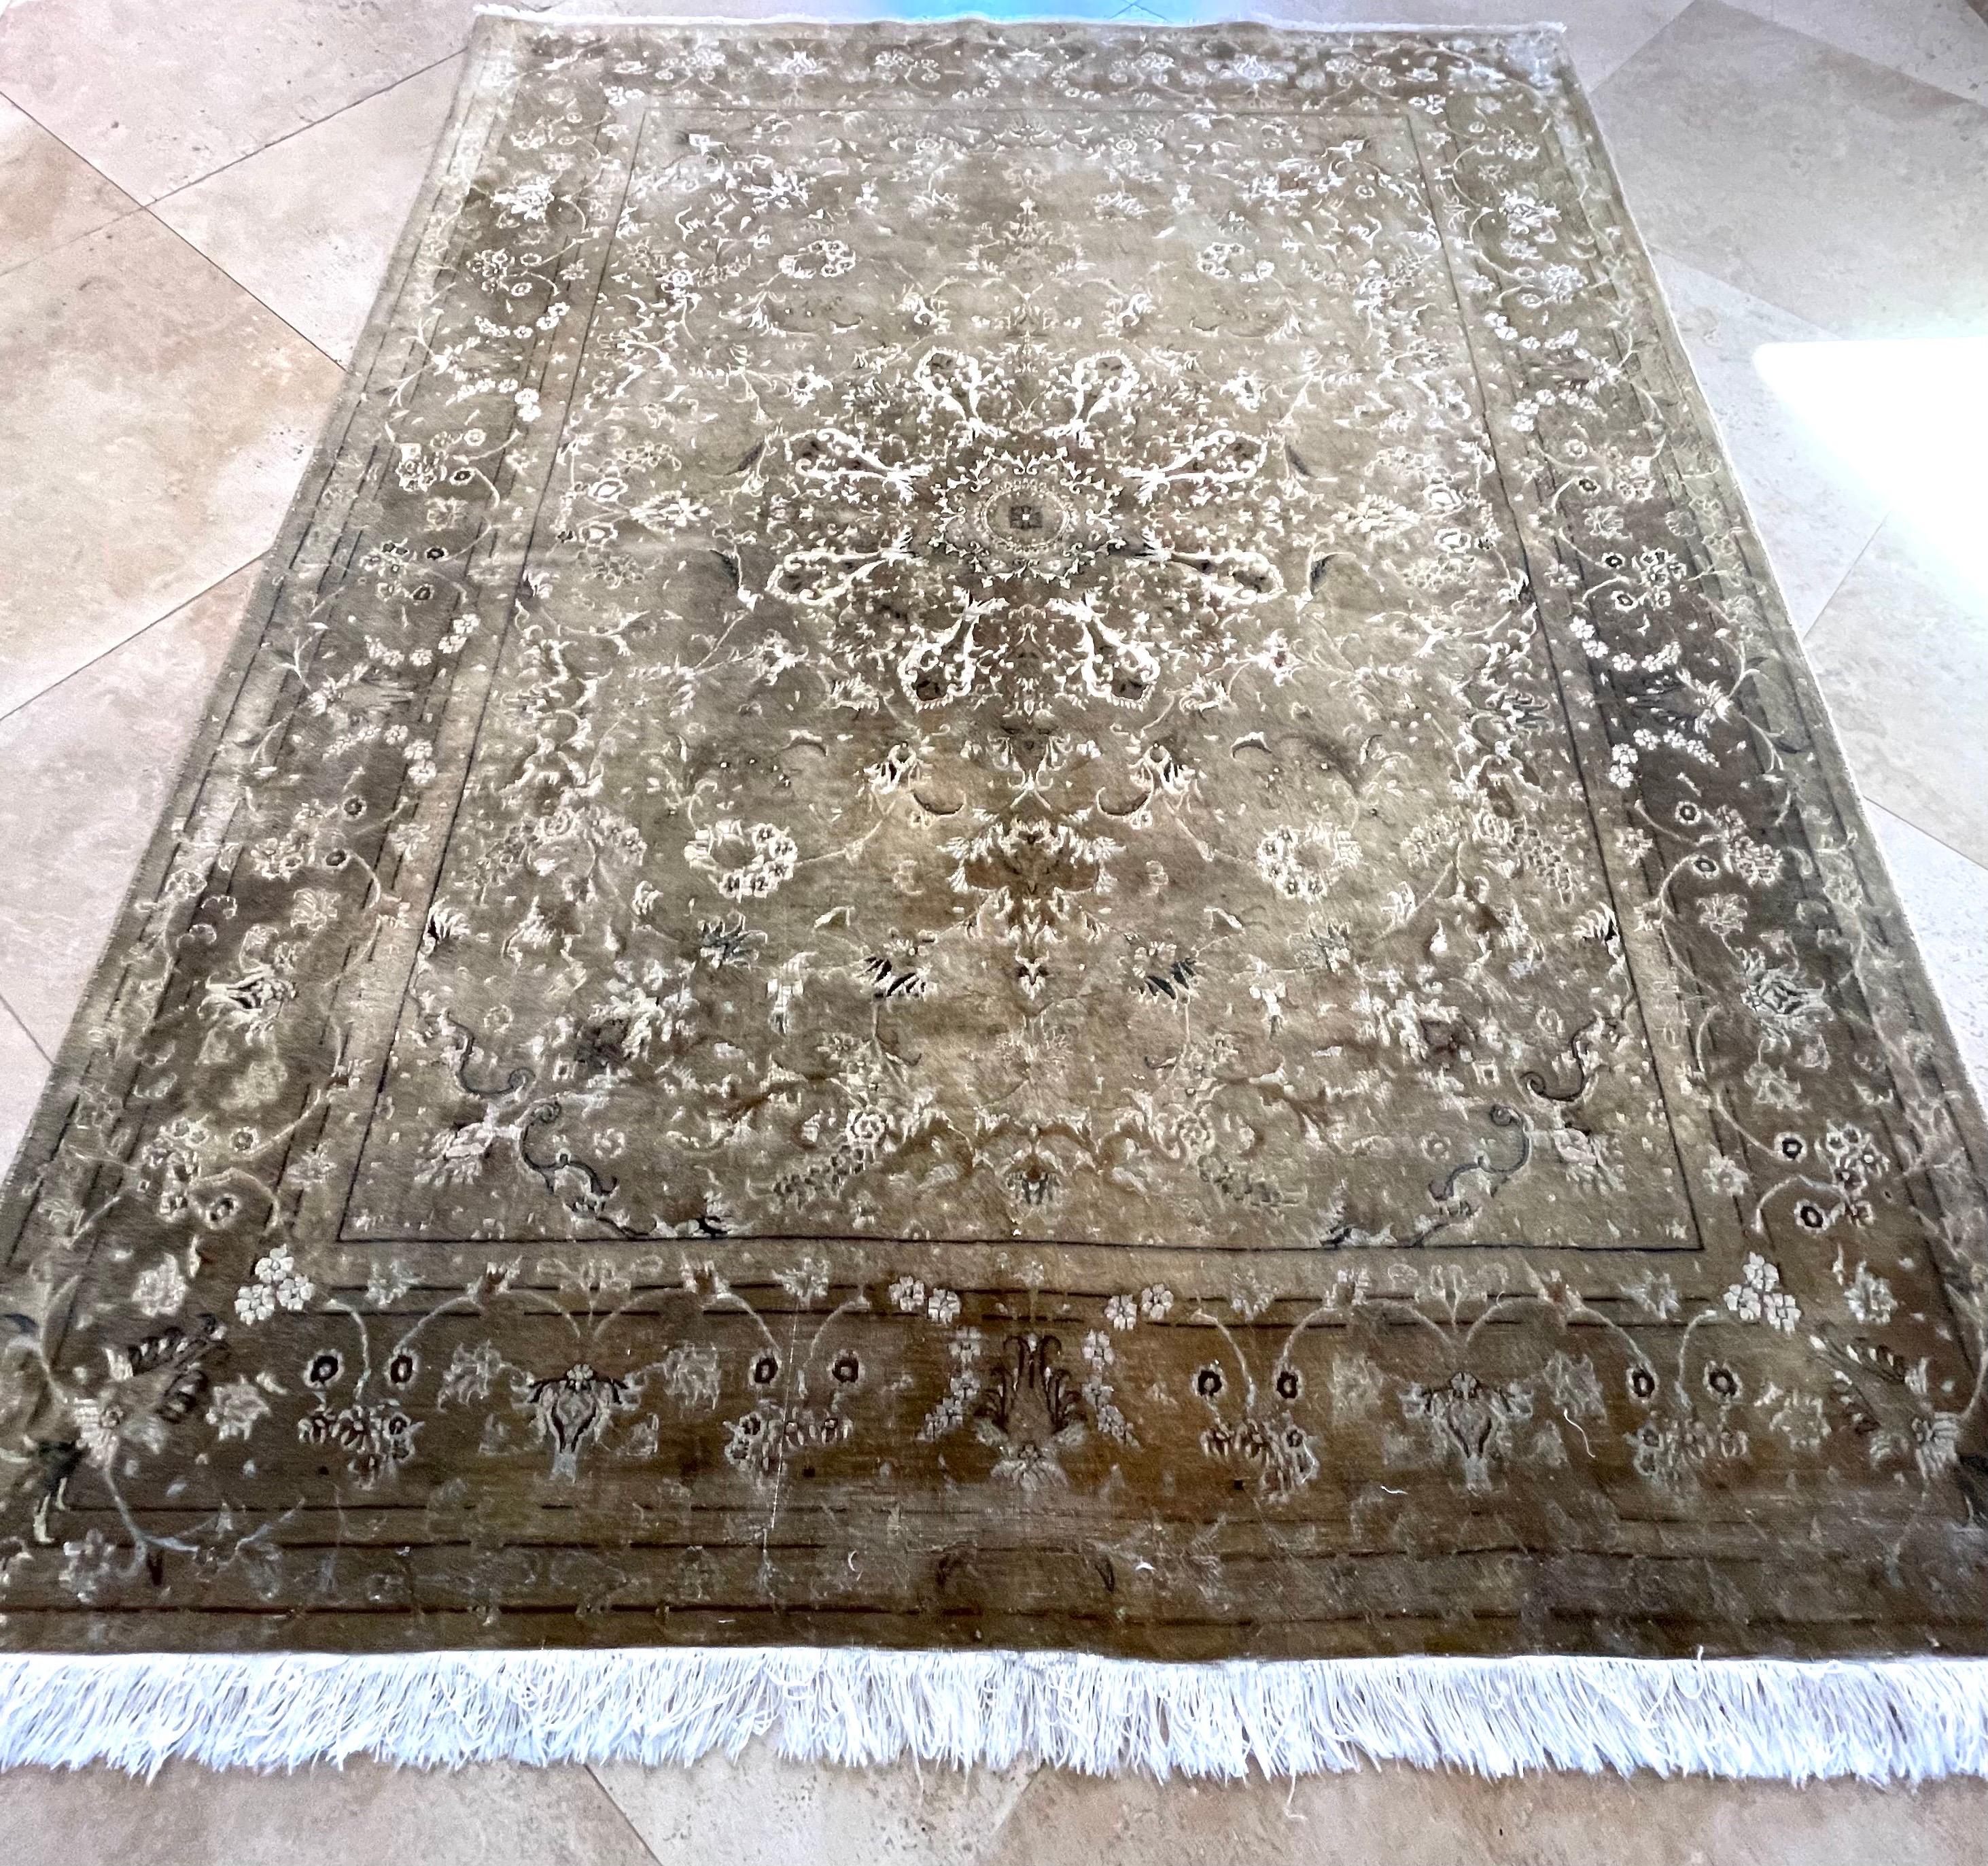 This rug is a hand-knotted Persian Tabriz rug with wool and silk pile and cotton foundation. Tabriz is one of the oldest rug weaving centers and makes a huge diversity of types of rugs. This rug features a medallion with floral pattern with a unique